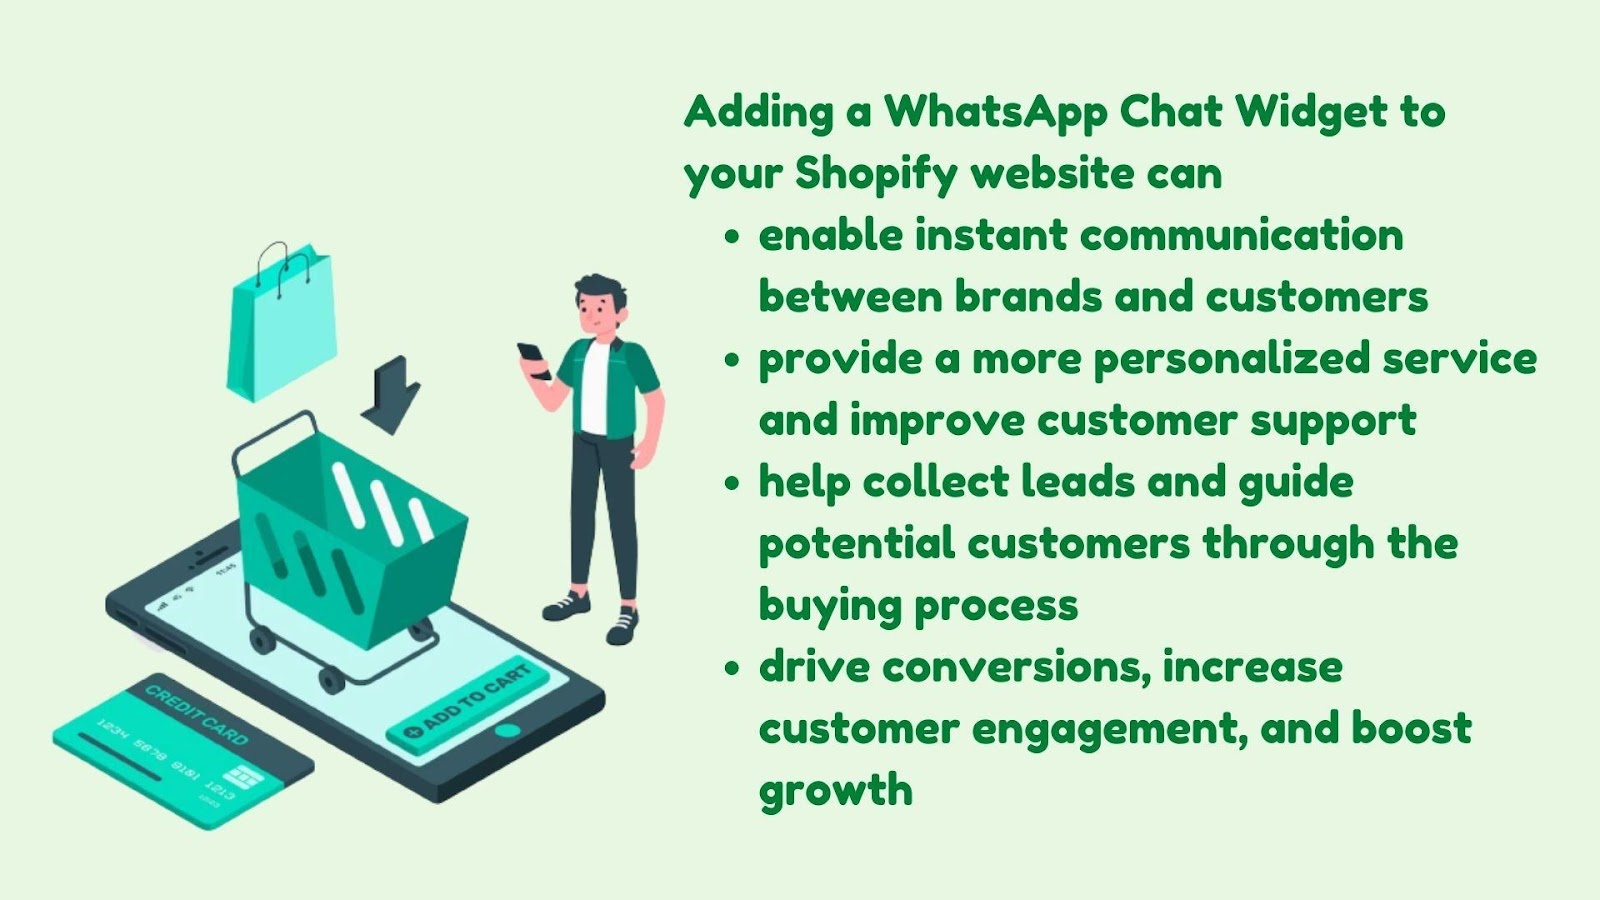 Adding a WhatsApp Chat Widget to your Shopify website can enable instant communication between brands and customers, provide more personalized service and improve customer support, help collect leads and guide potential customers through the buying process, drive conversions, increase customer engagement, and boost growth.